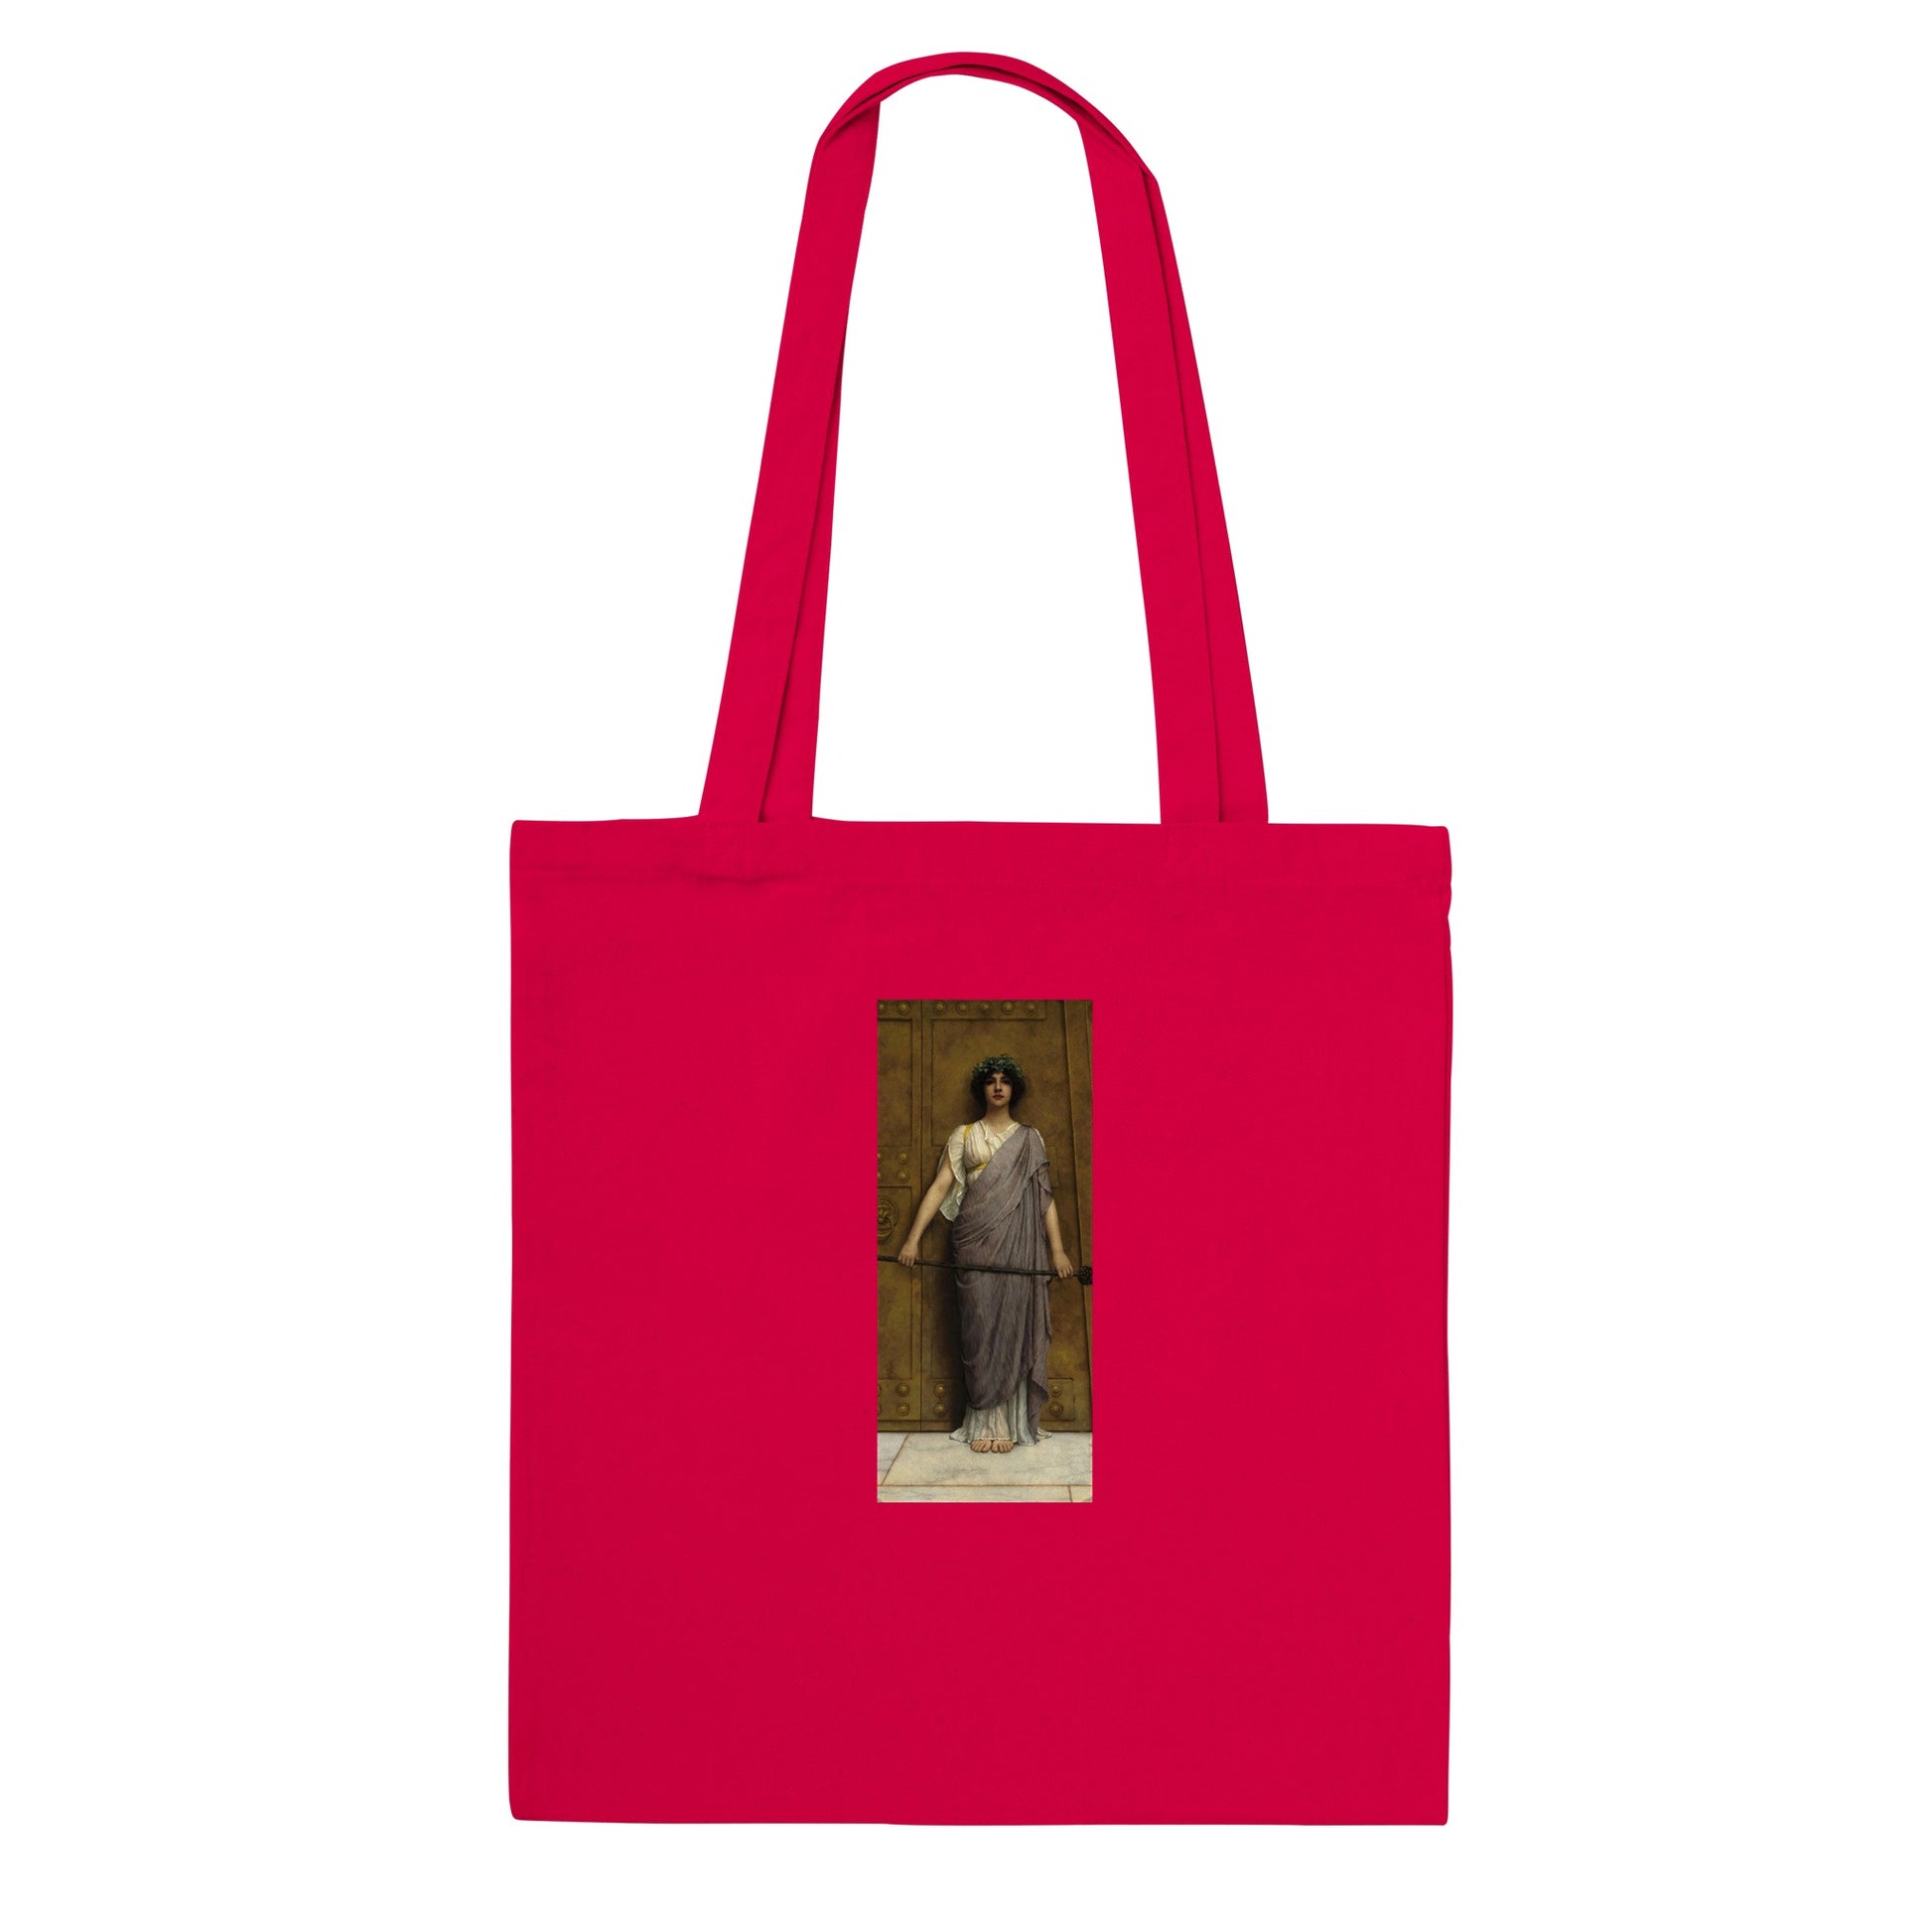 JOHN WILLIAM GODWARD - AT THE GATE OF THE TEMPLE - CLASSIC TOTE BAG